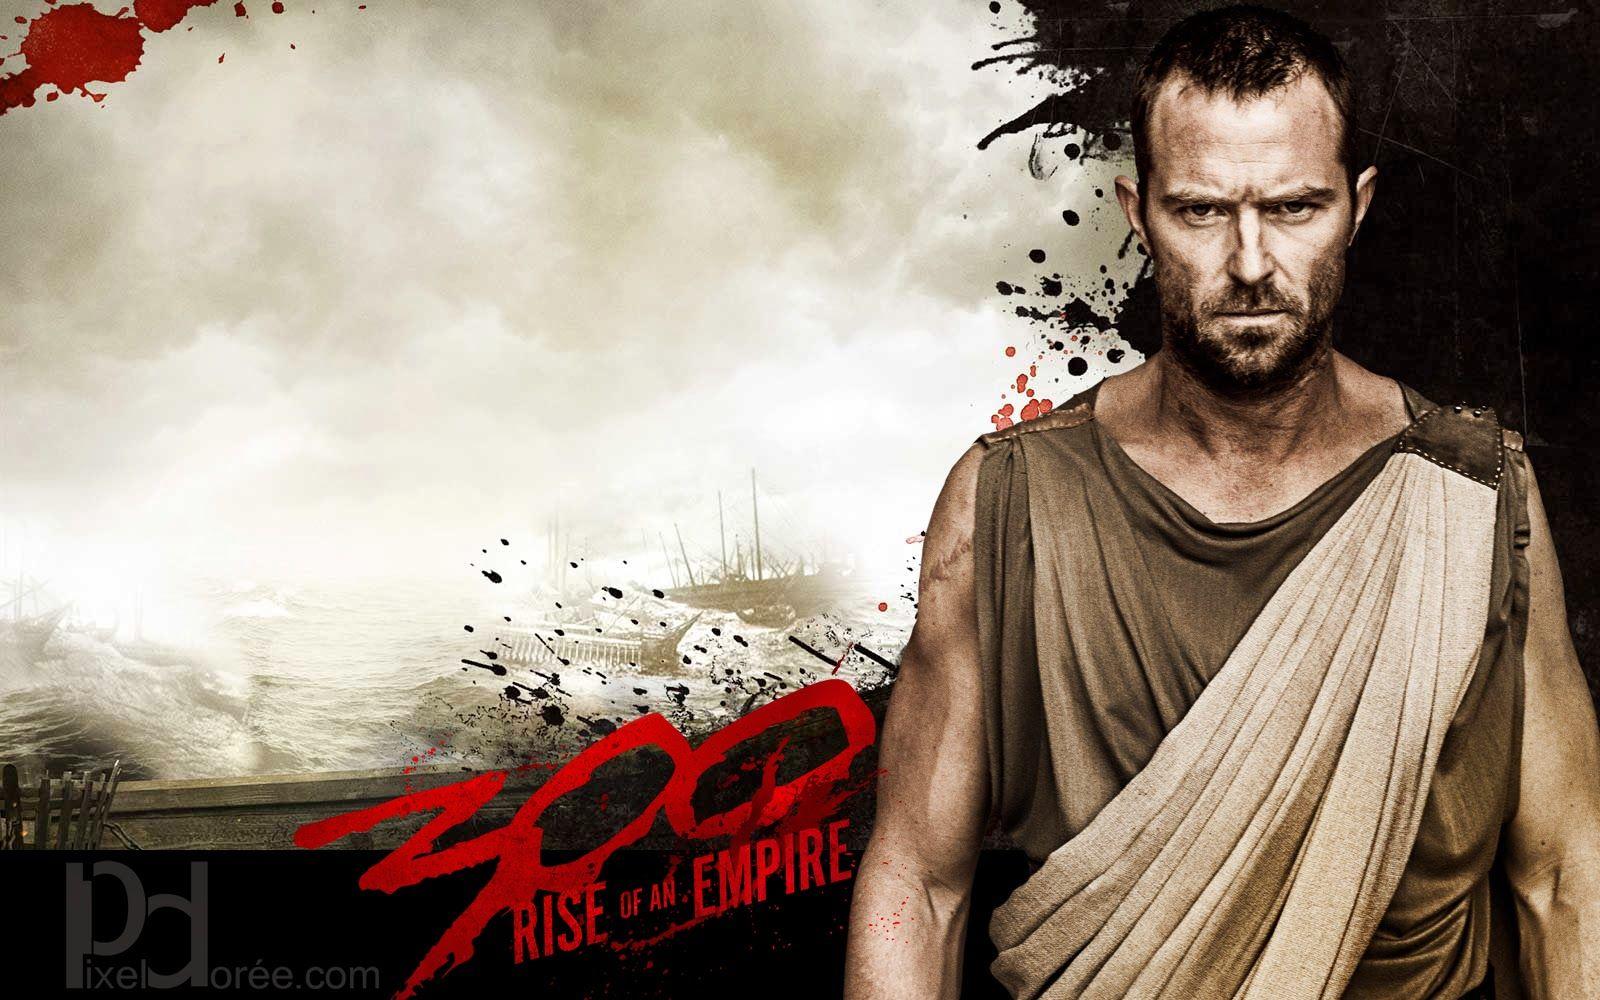 Hollywood Upcoming HD Wallpaper Of 300 Rise of An Empire 2014